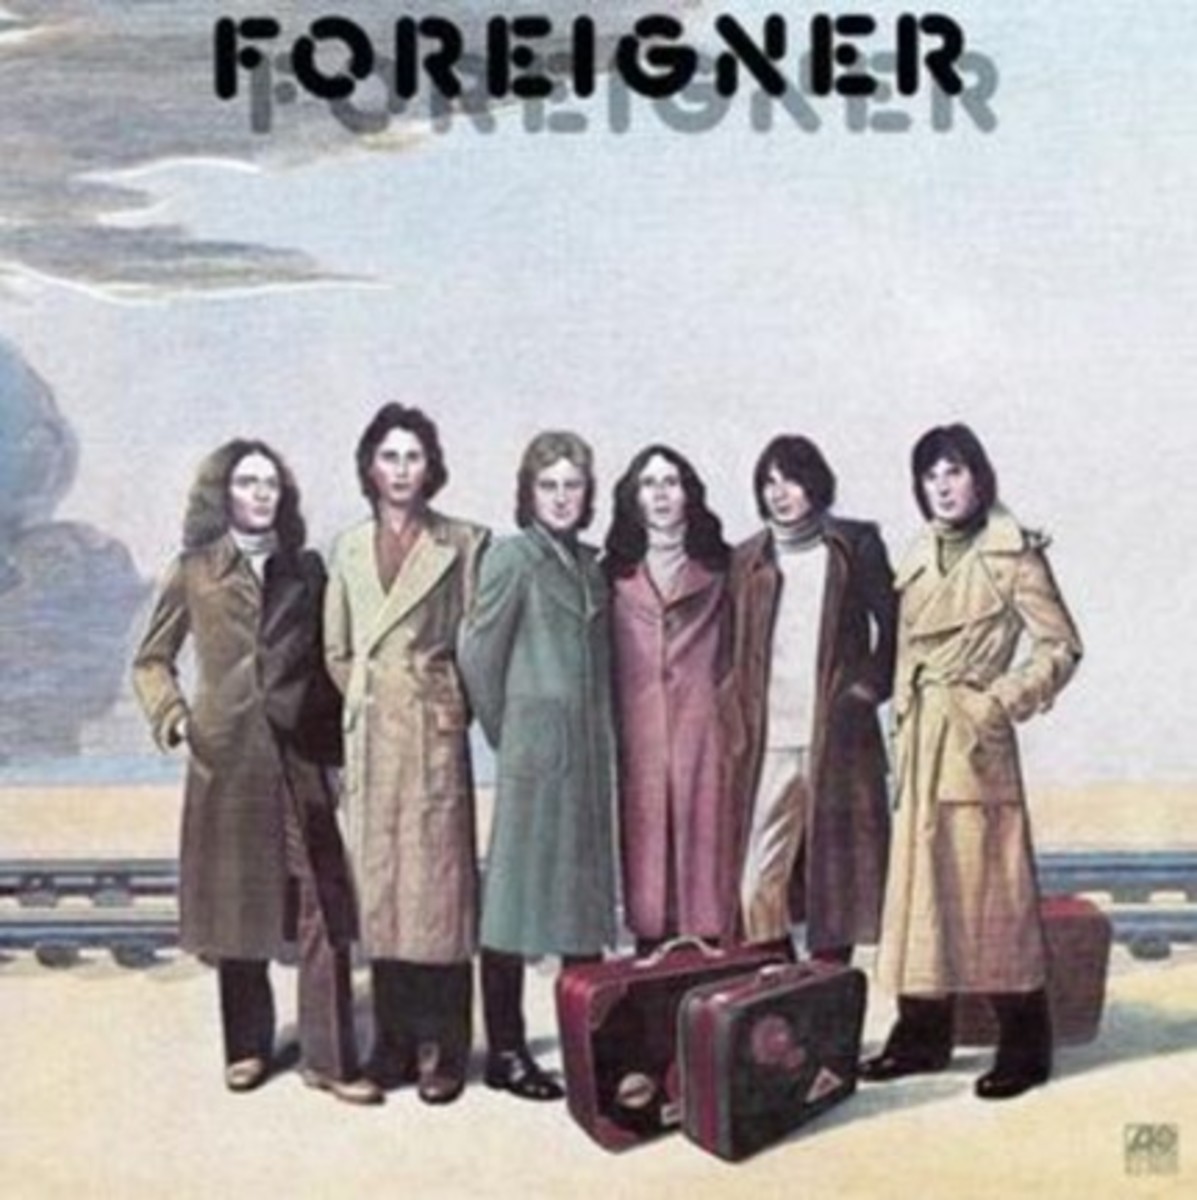 Foreigner’s 1977 self-titled debut album